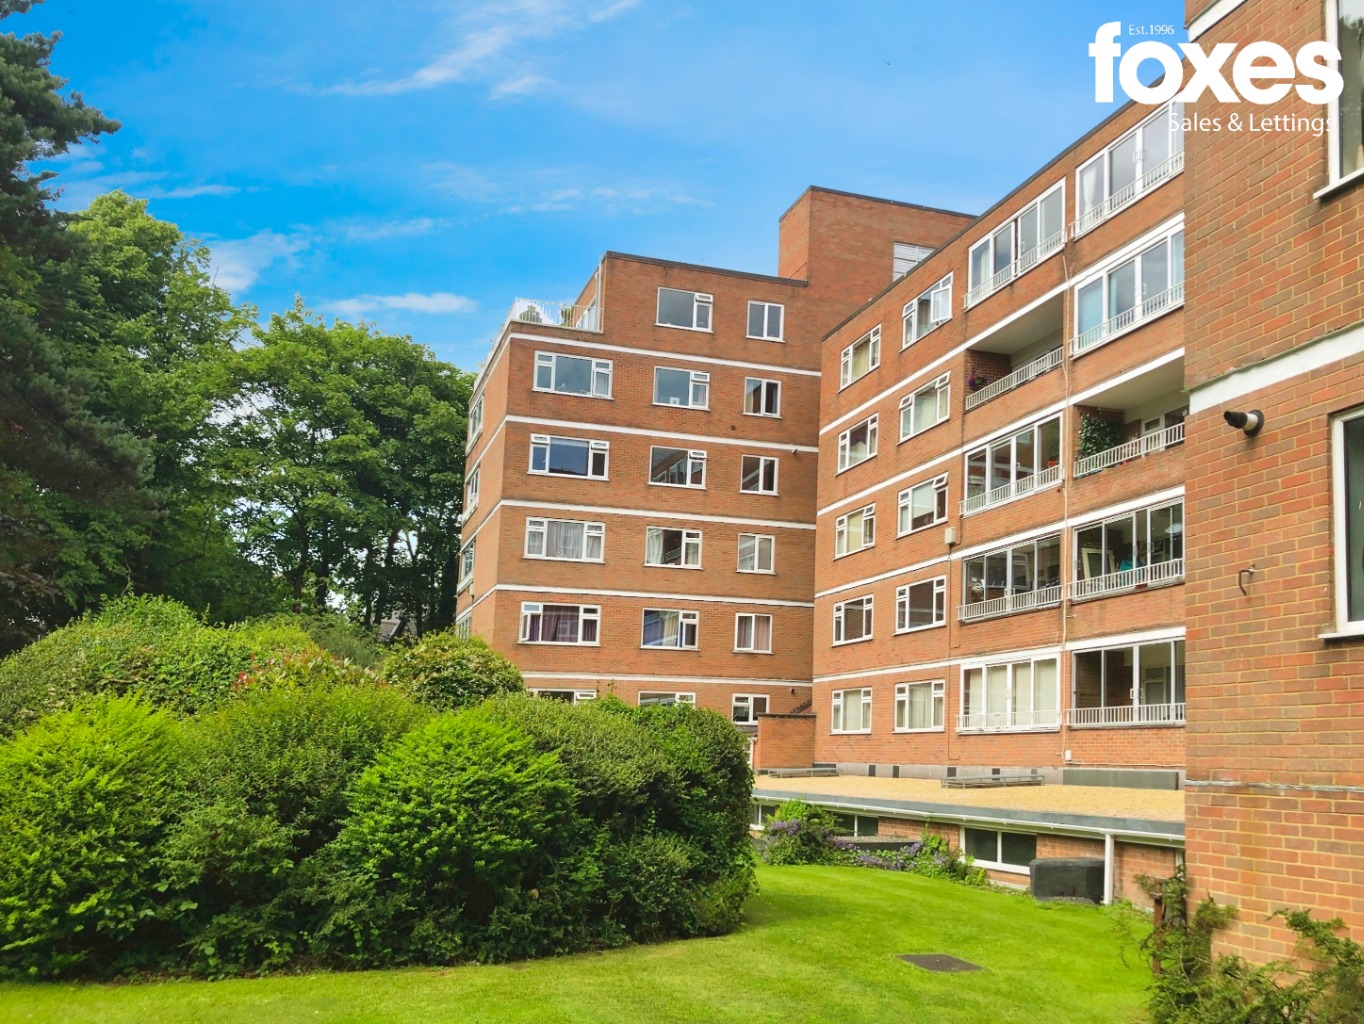 3 bed flat for sale in Dean Park Mansions, Bournemouth - Property Image 1